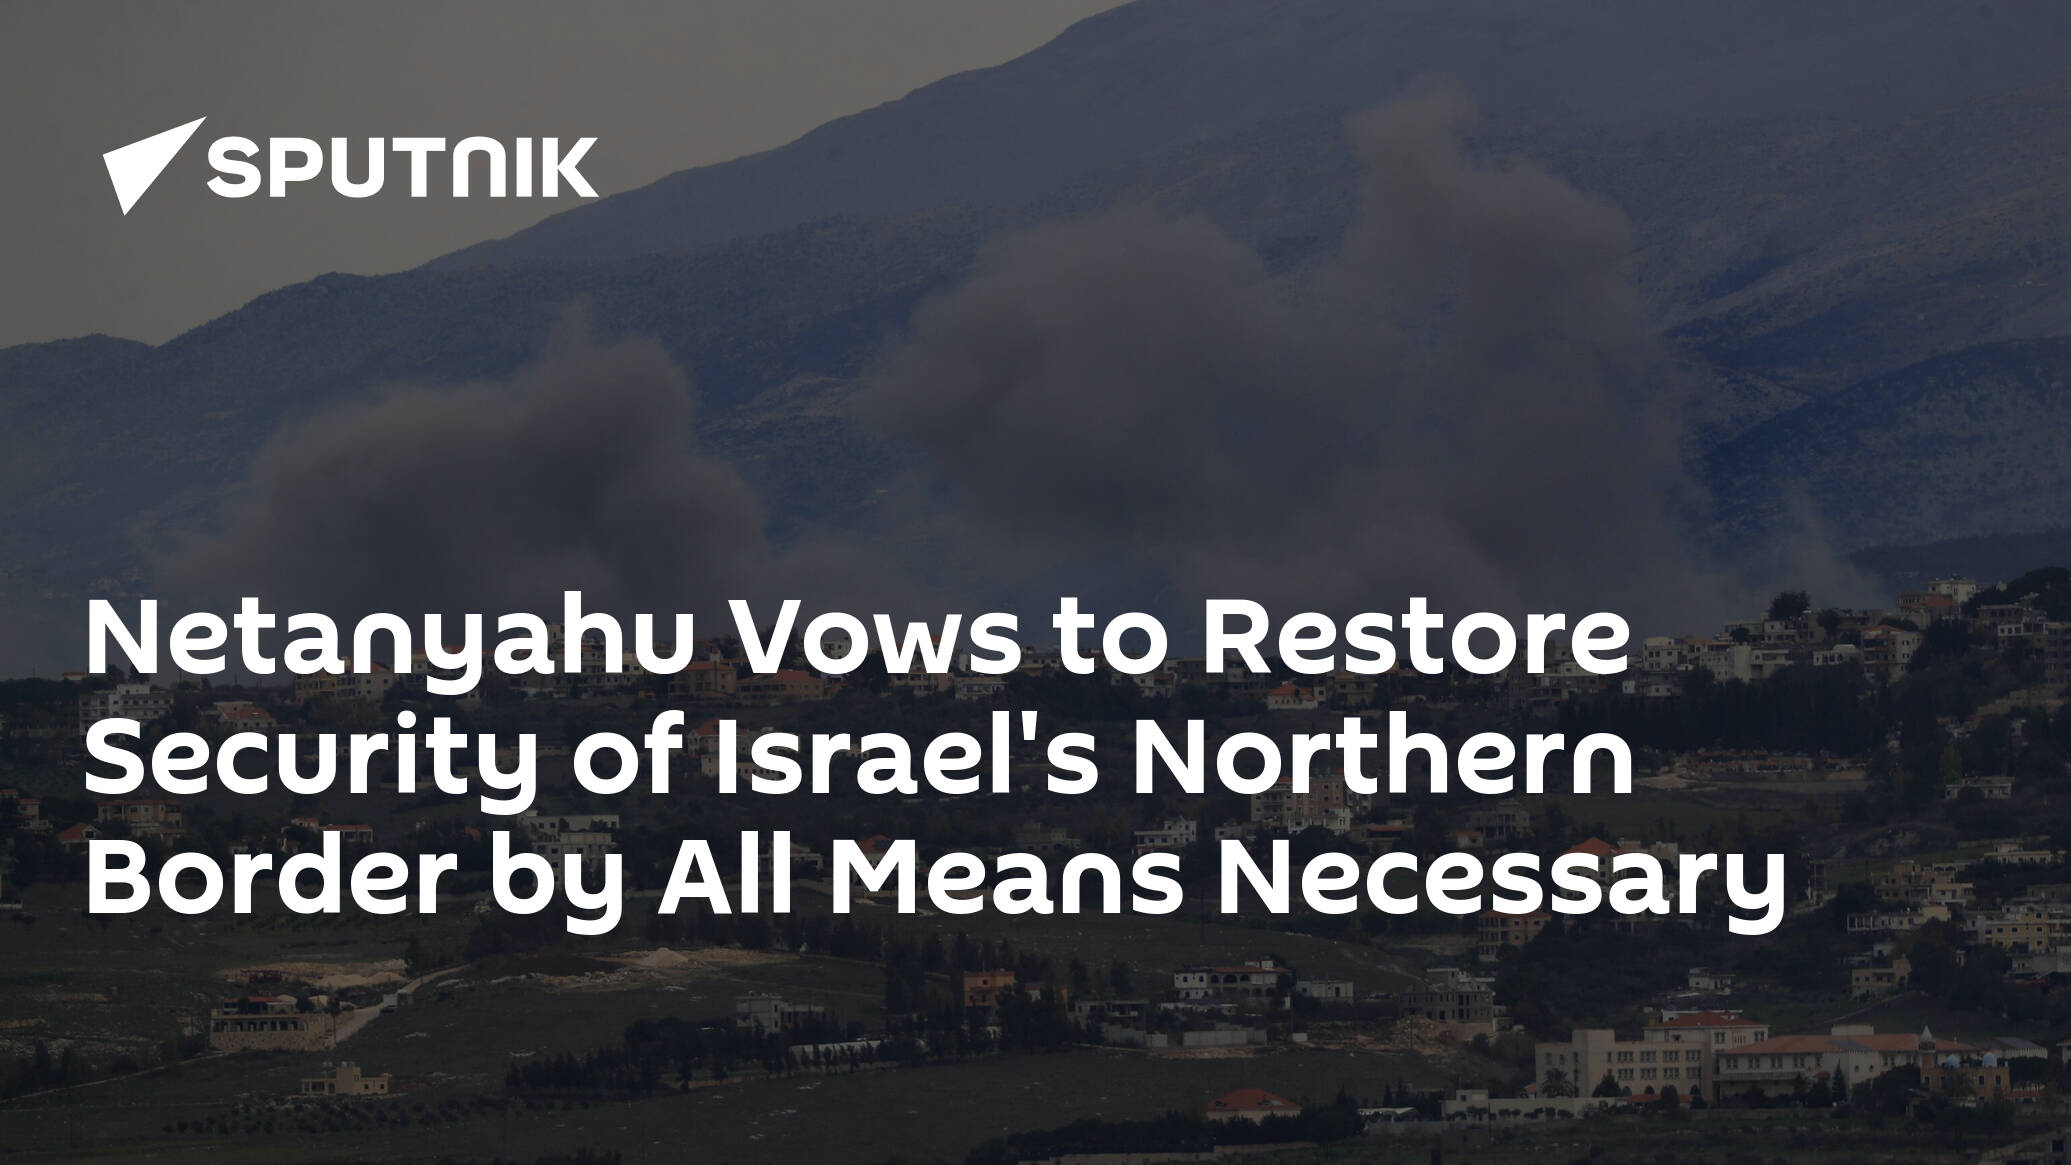 Netanyahu Vows to Restore Security of Israel's Northern Border by All Means Necessary